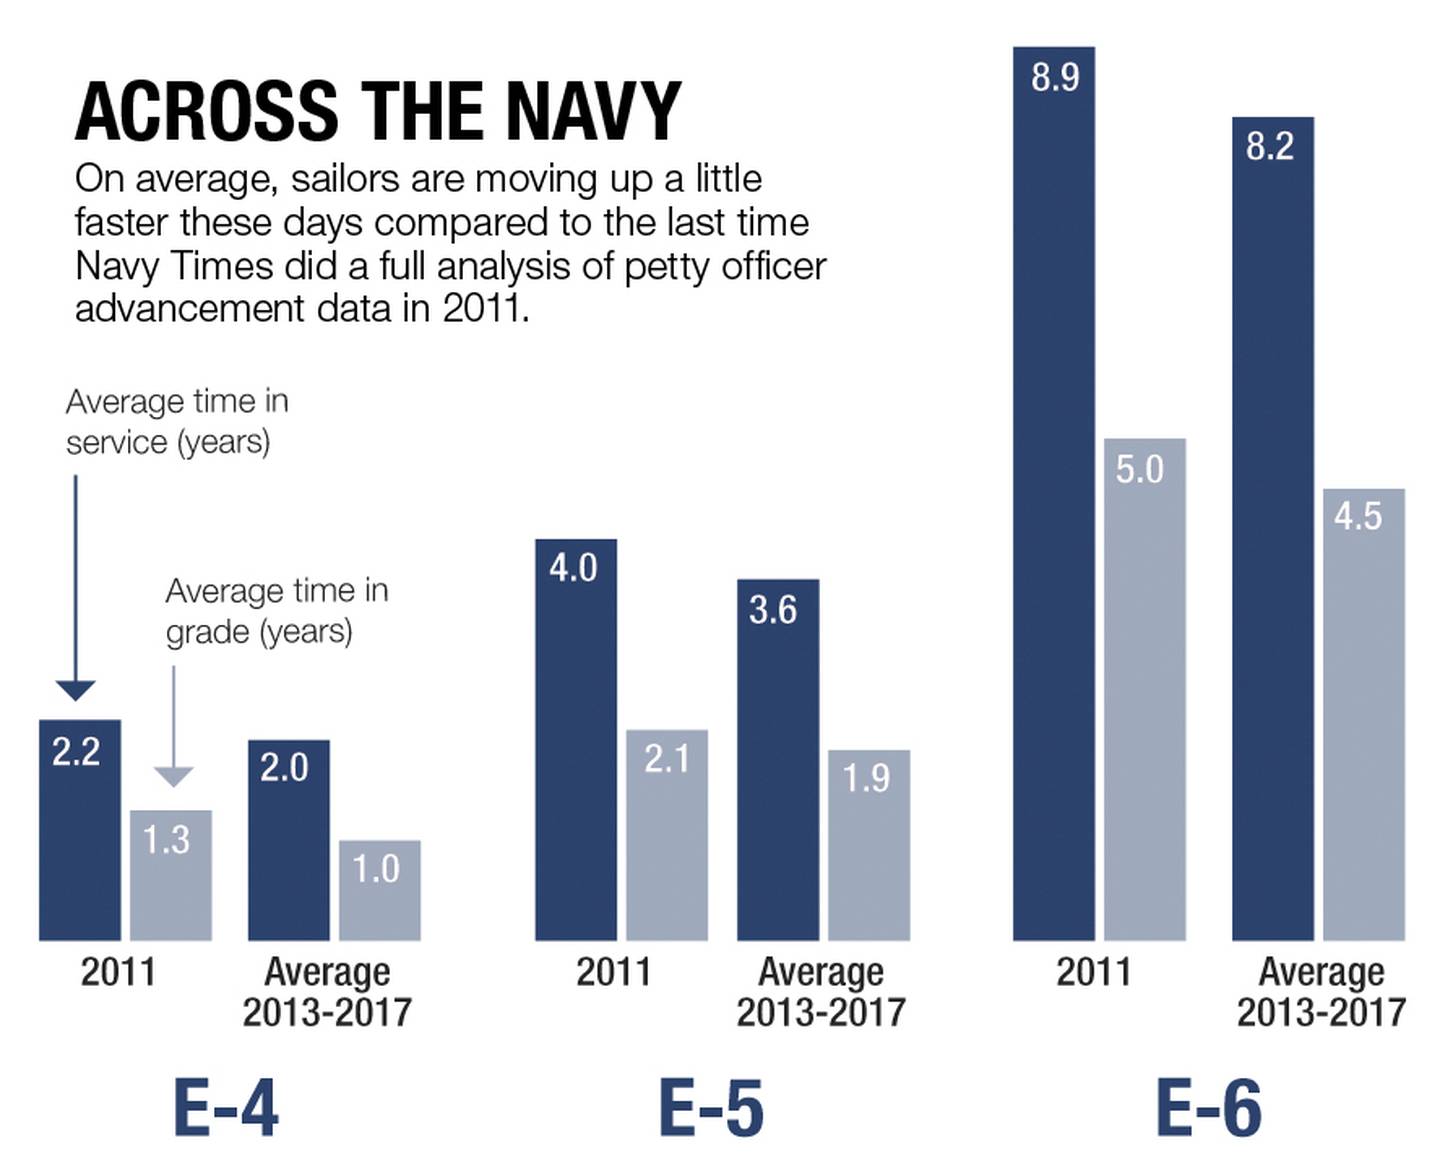 Why some rates move up faster than others An inside look at Navy career paths